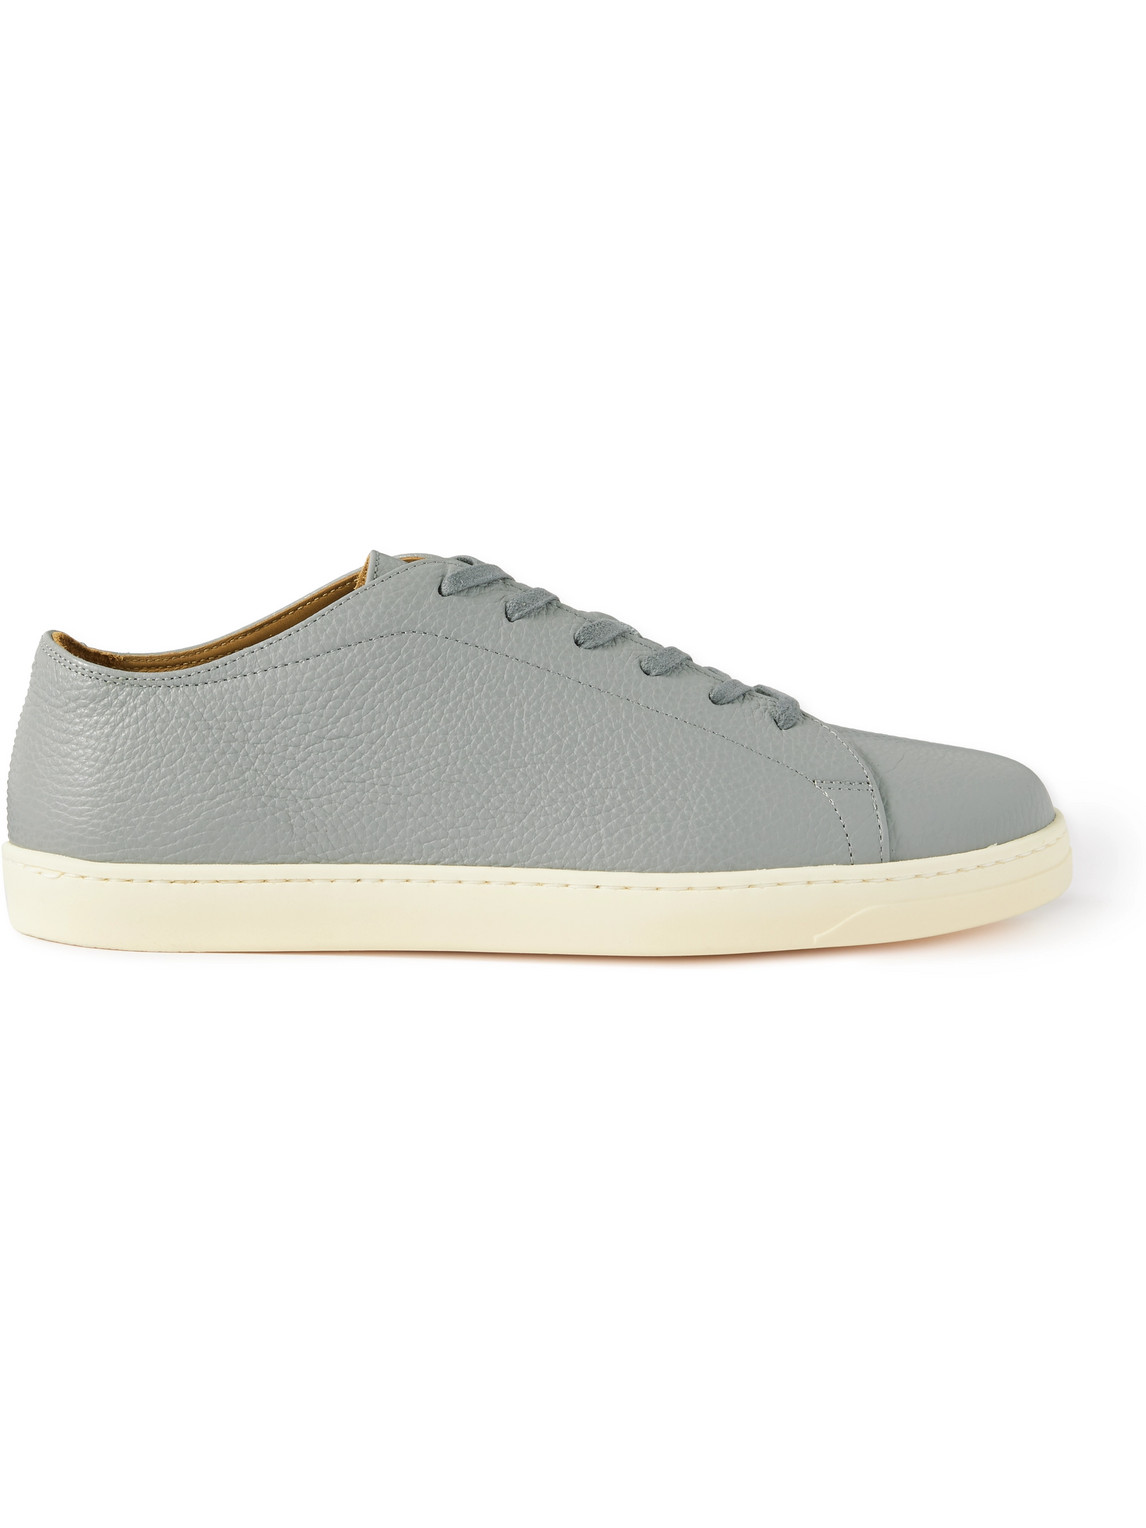 George Cleverley Full-grain Leather Sneakers In Gray